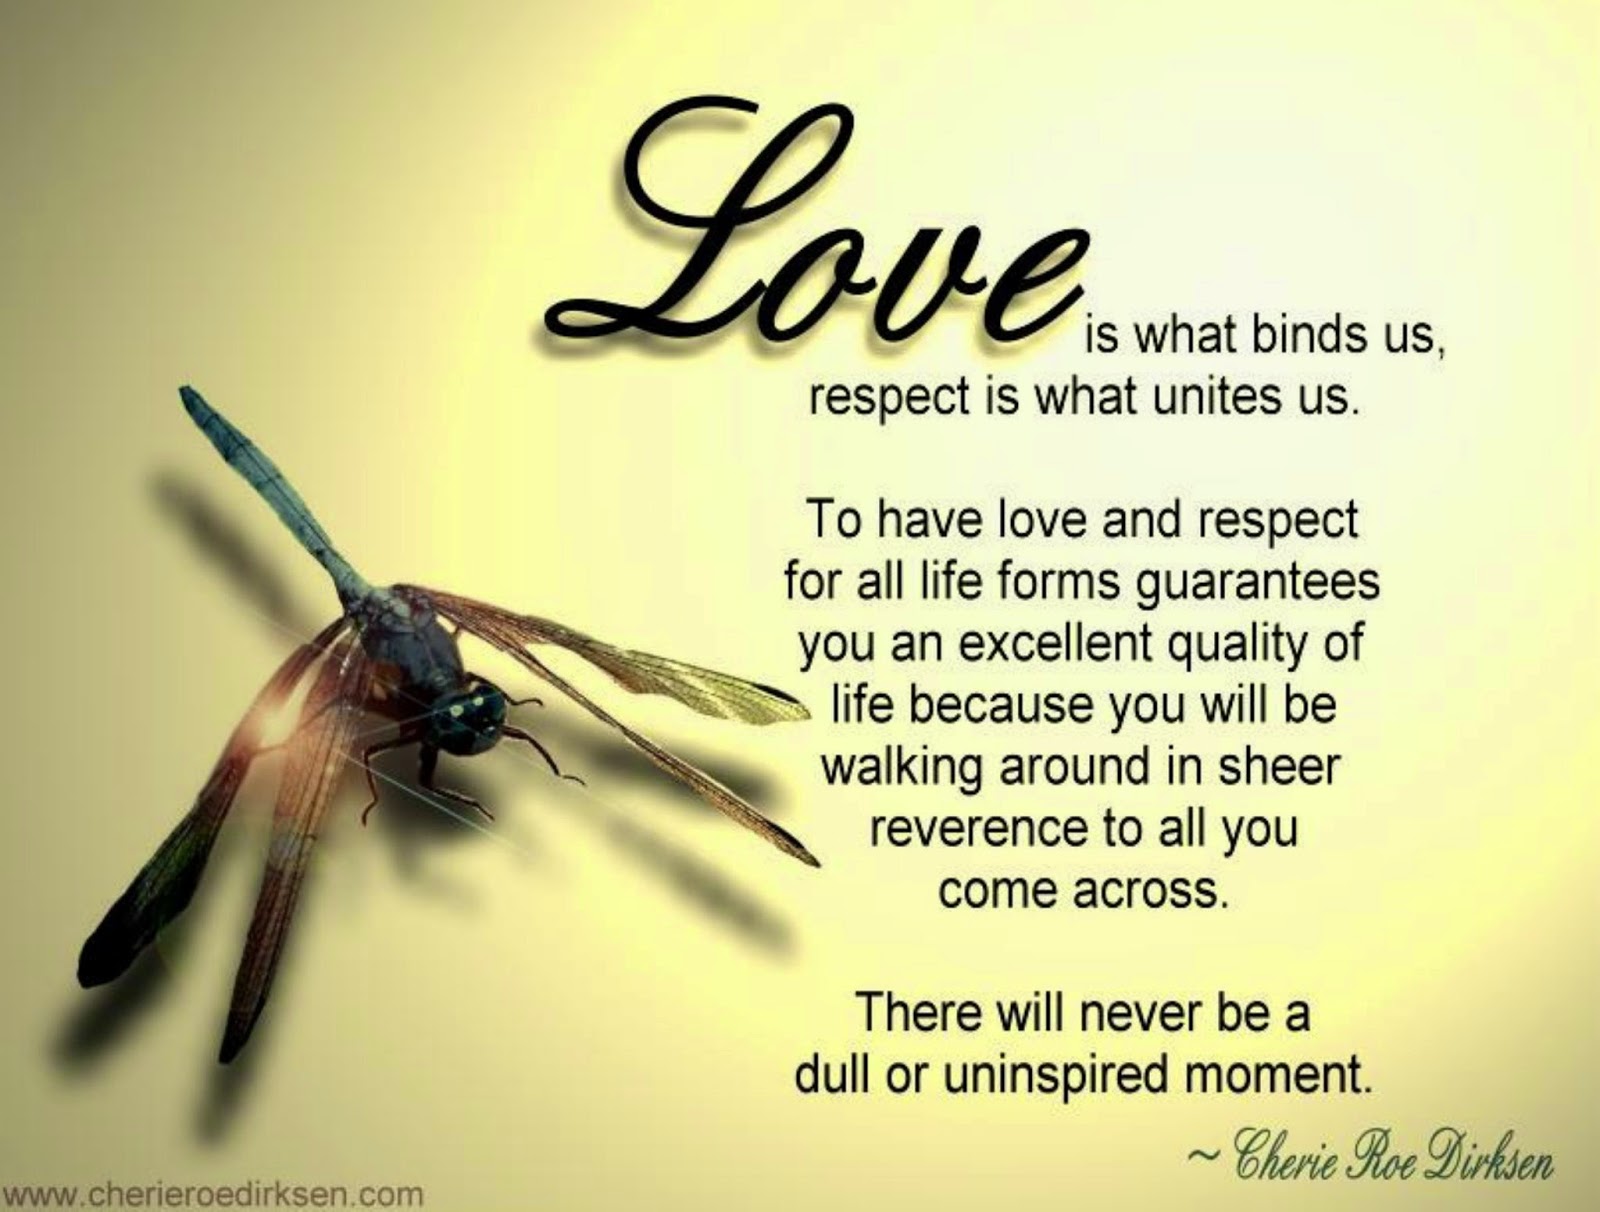 "LOVE is what bind us RESPECT is what unite us To have love and respect for all life forms guarantees you an excellent quality of life because you will be